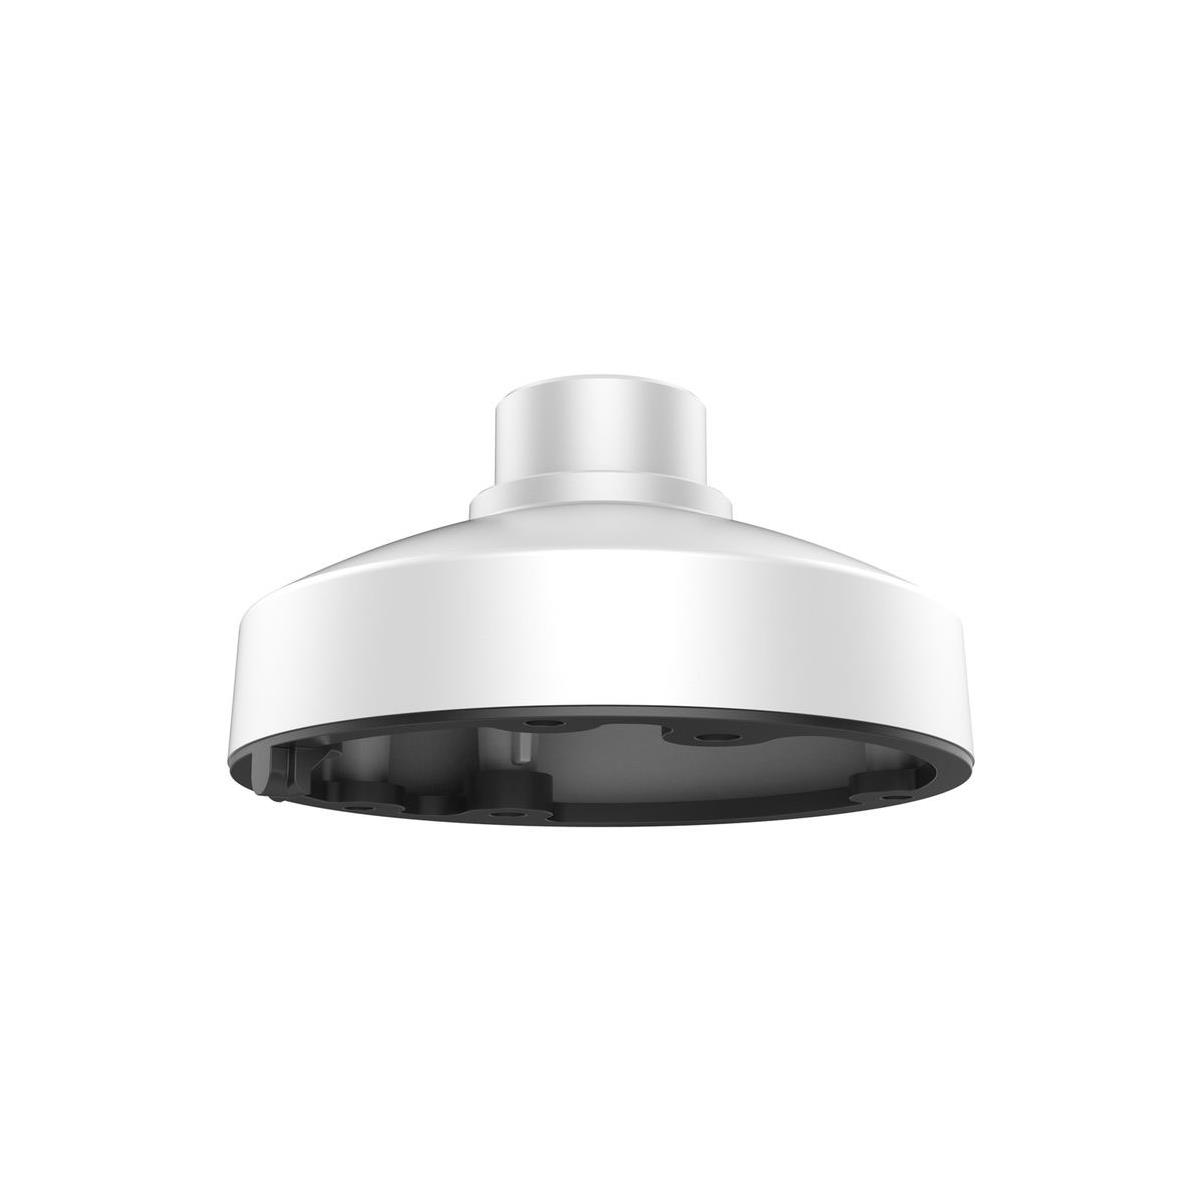 Image of Hikvision Pendant Cap Bracket for Dome Camera